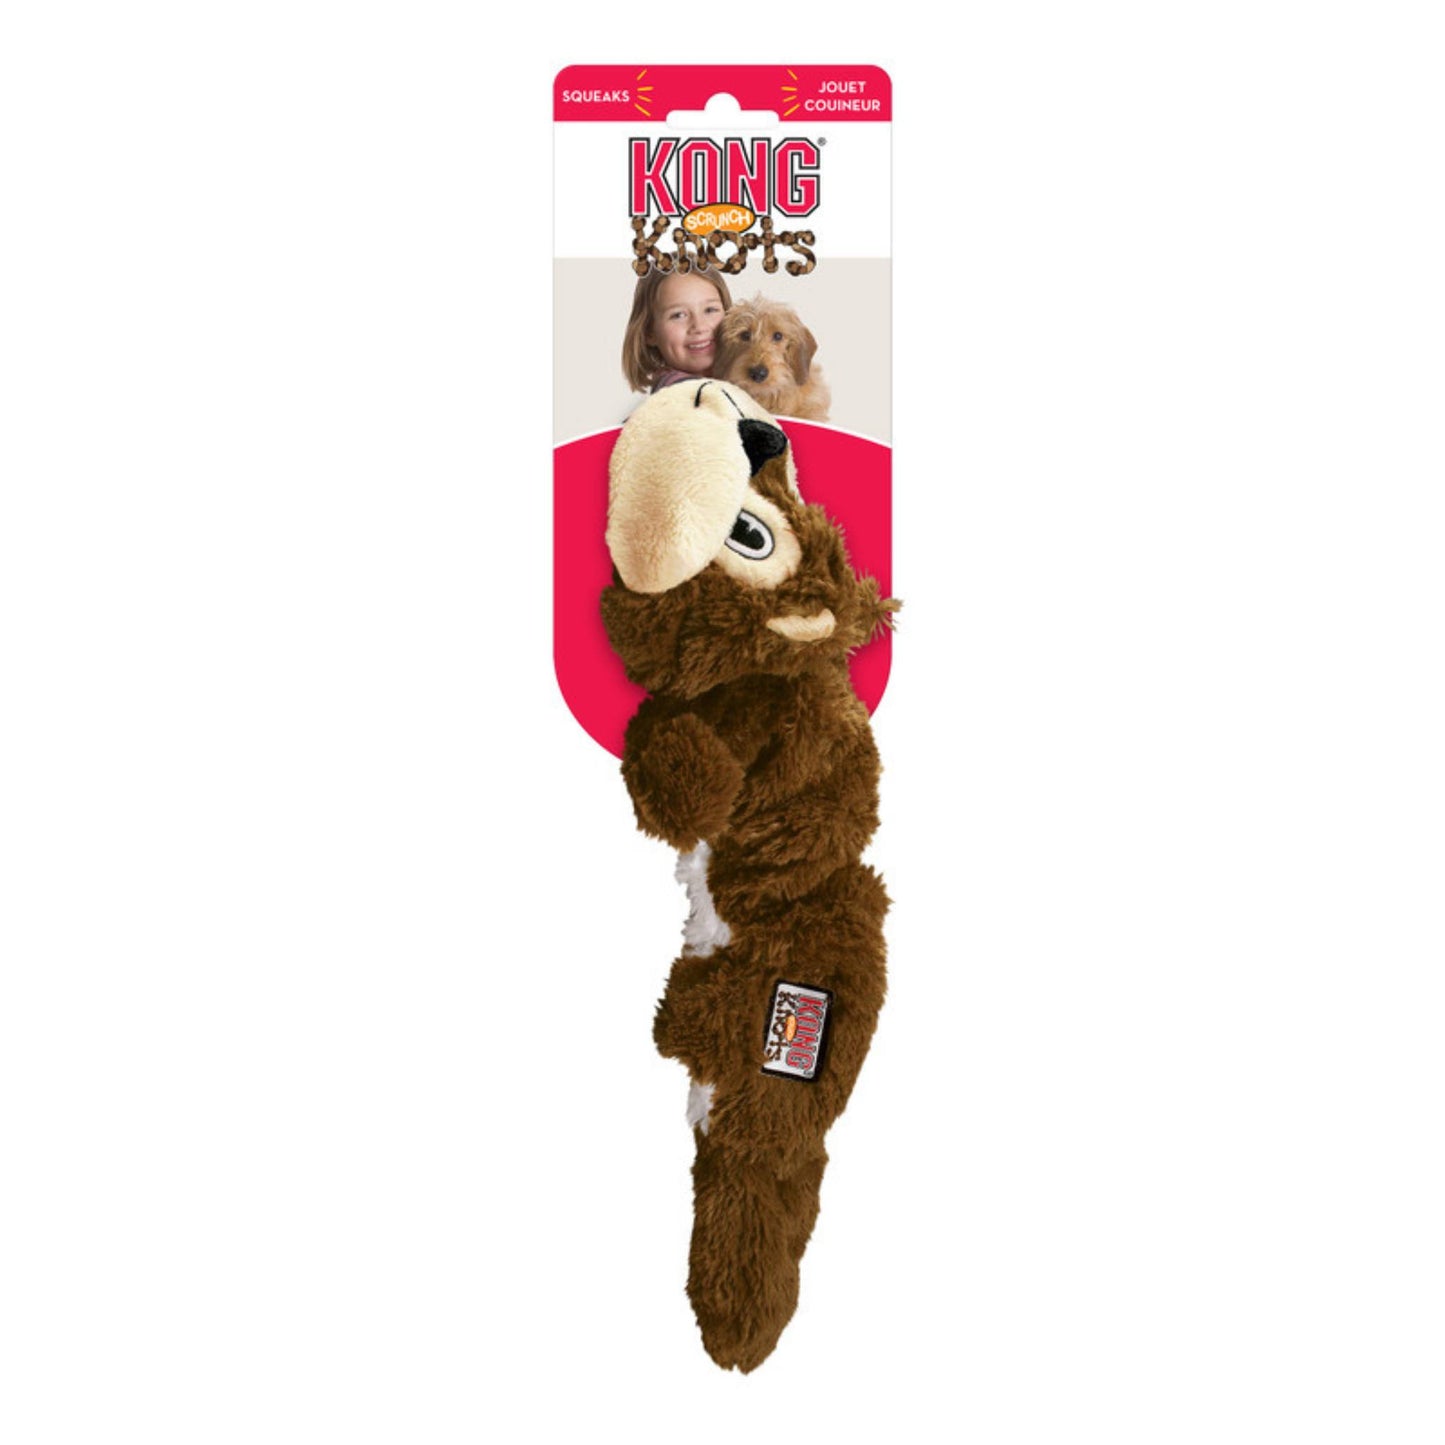 Kong scrunch knots squirrel dog toy in package